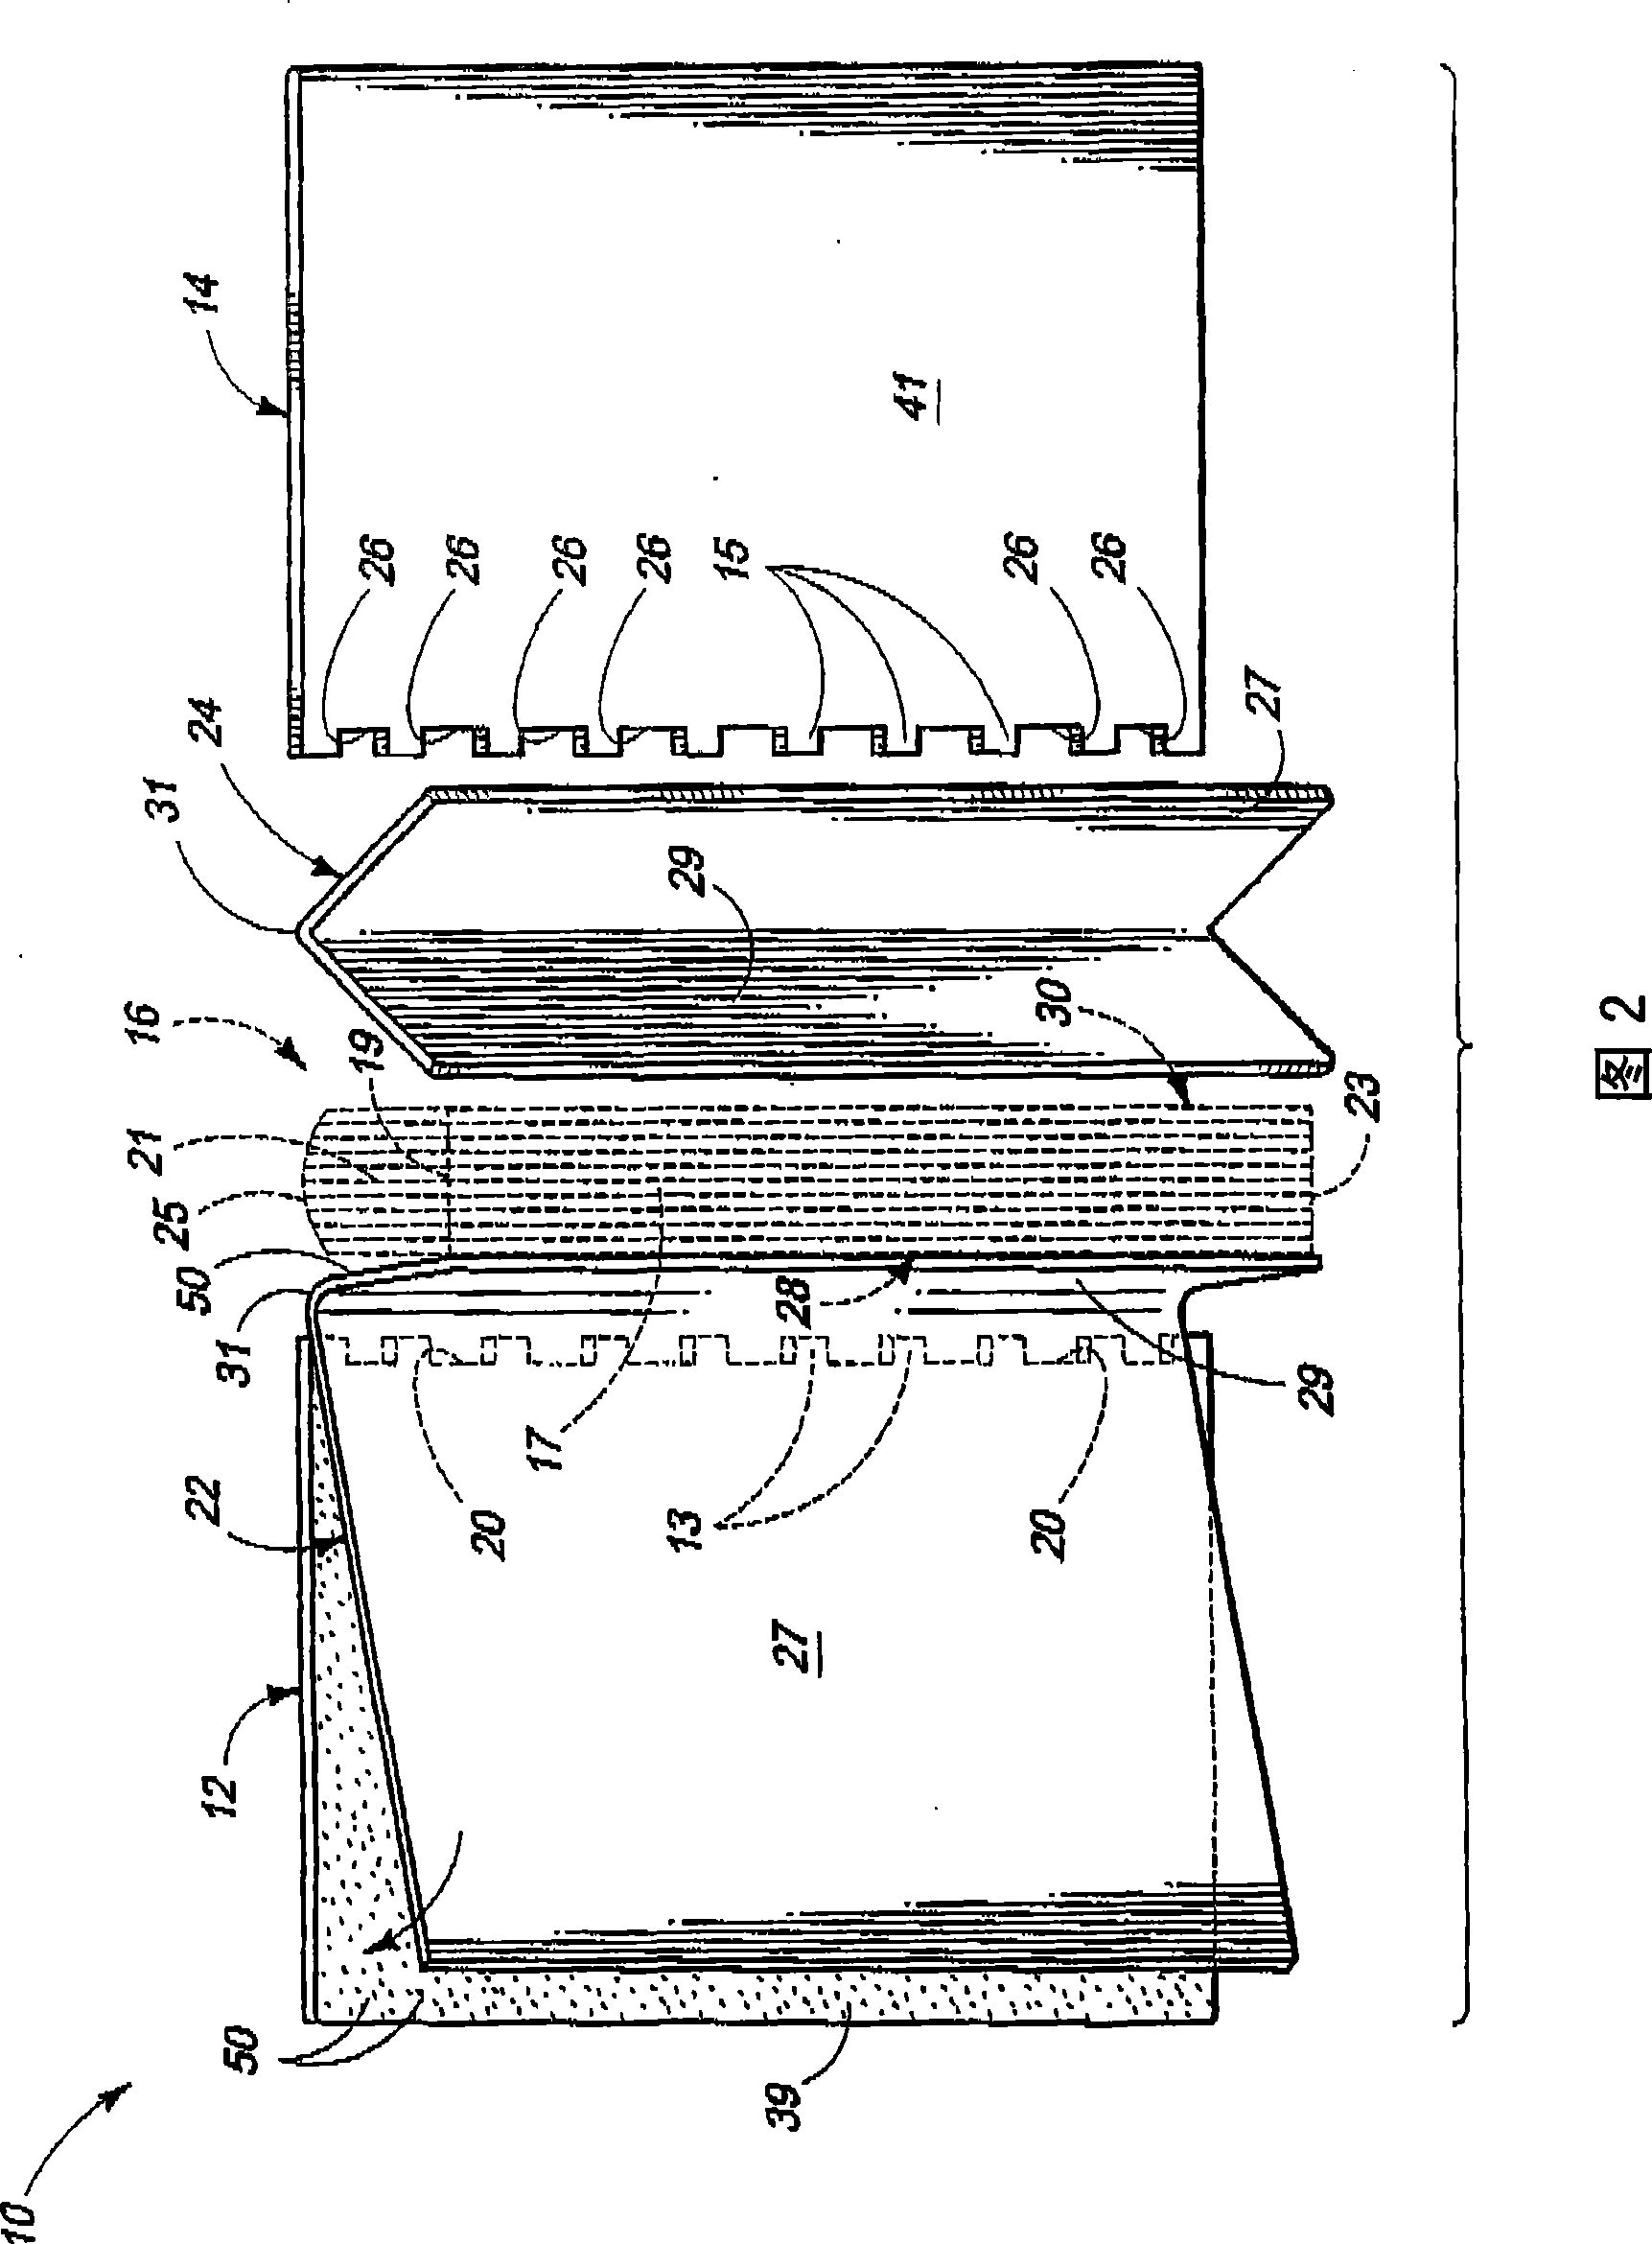 Collection of sheets of paper and methods of forming a collection of sheets of paper